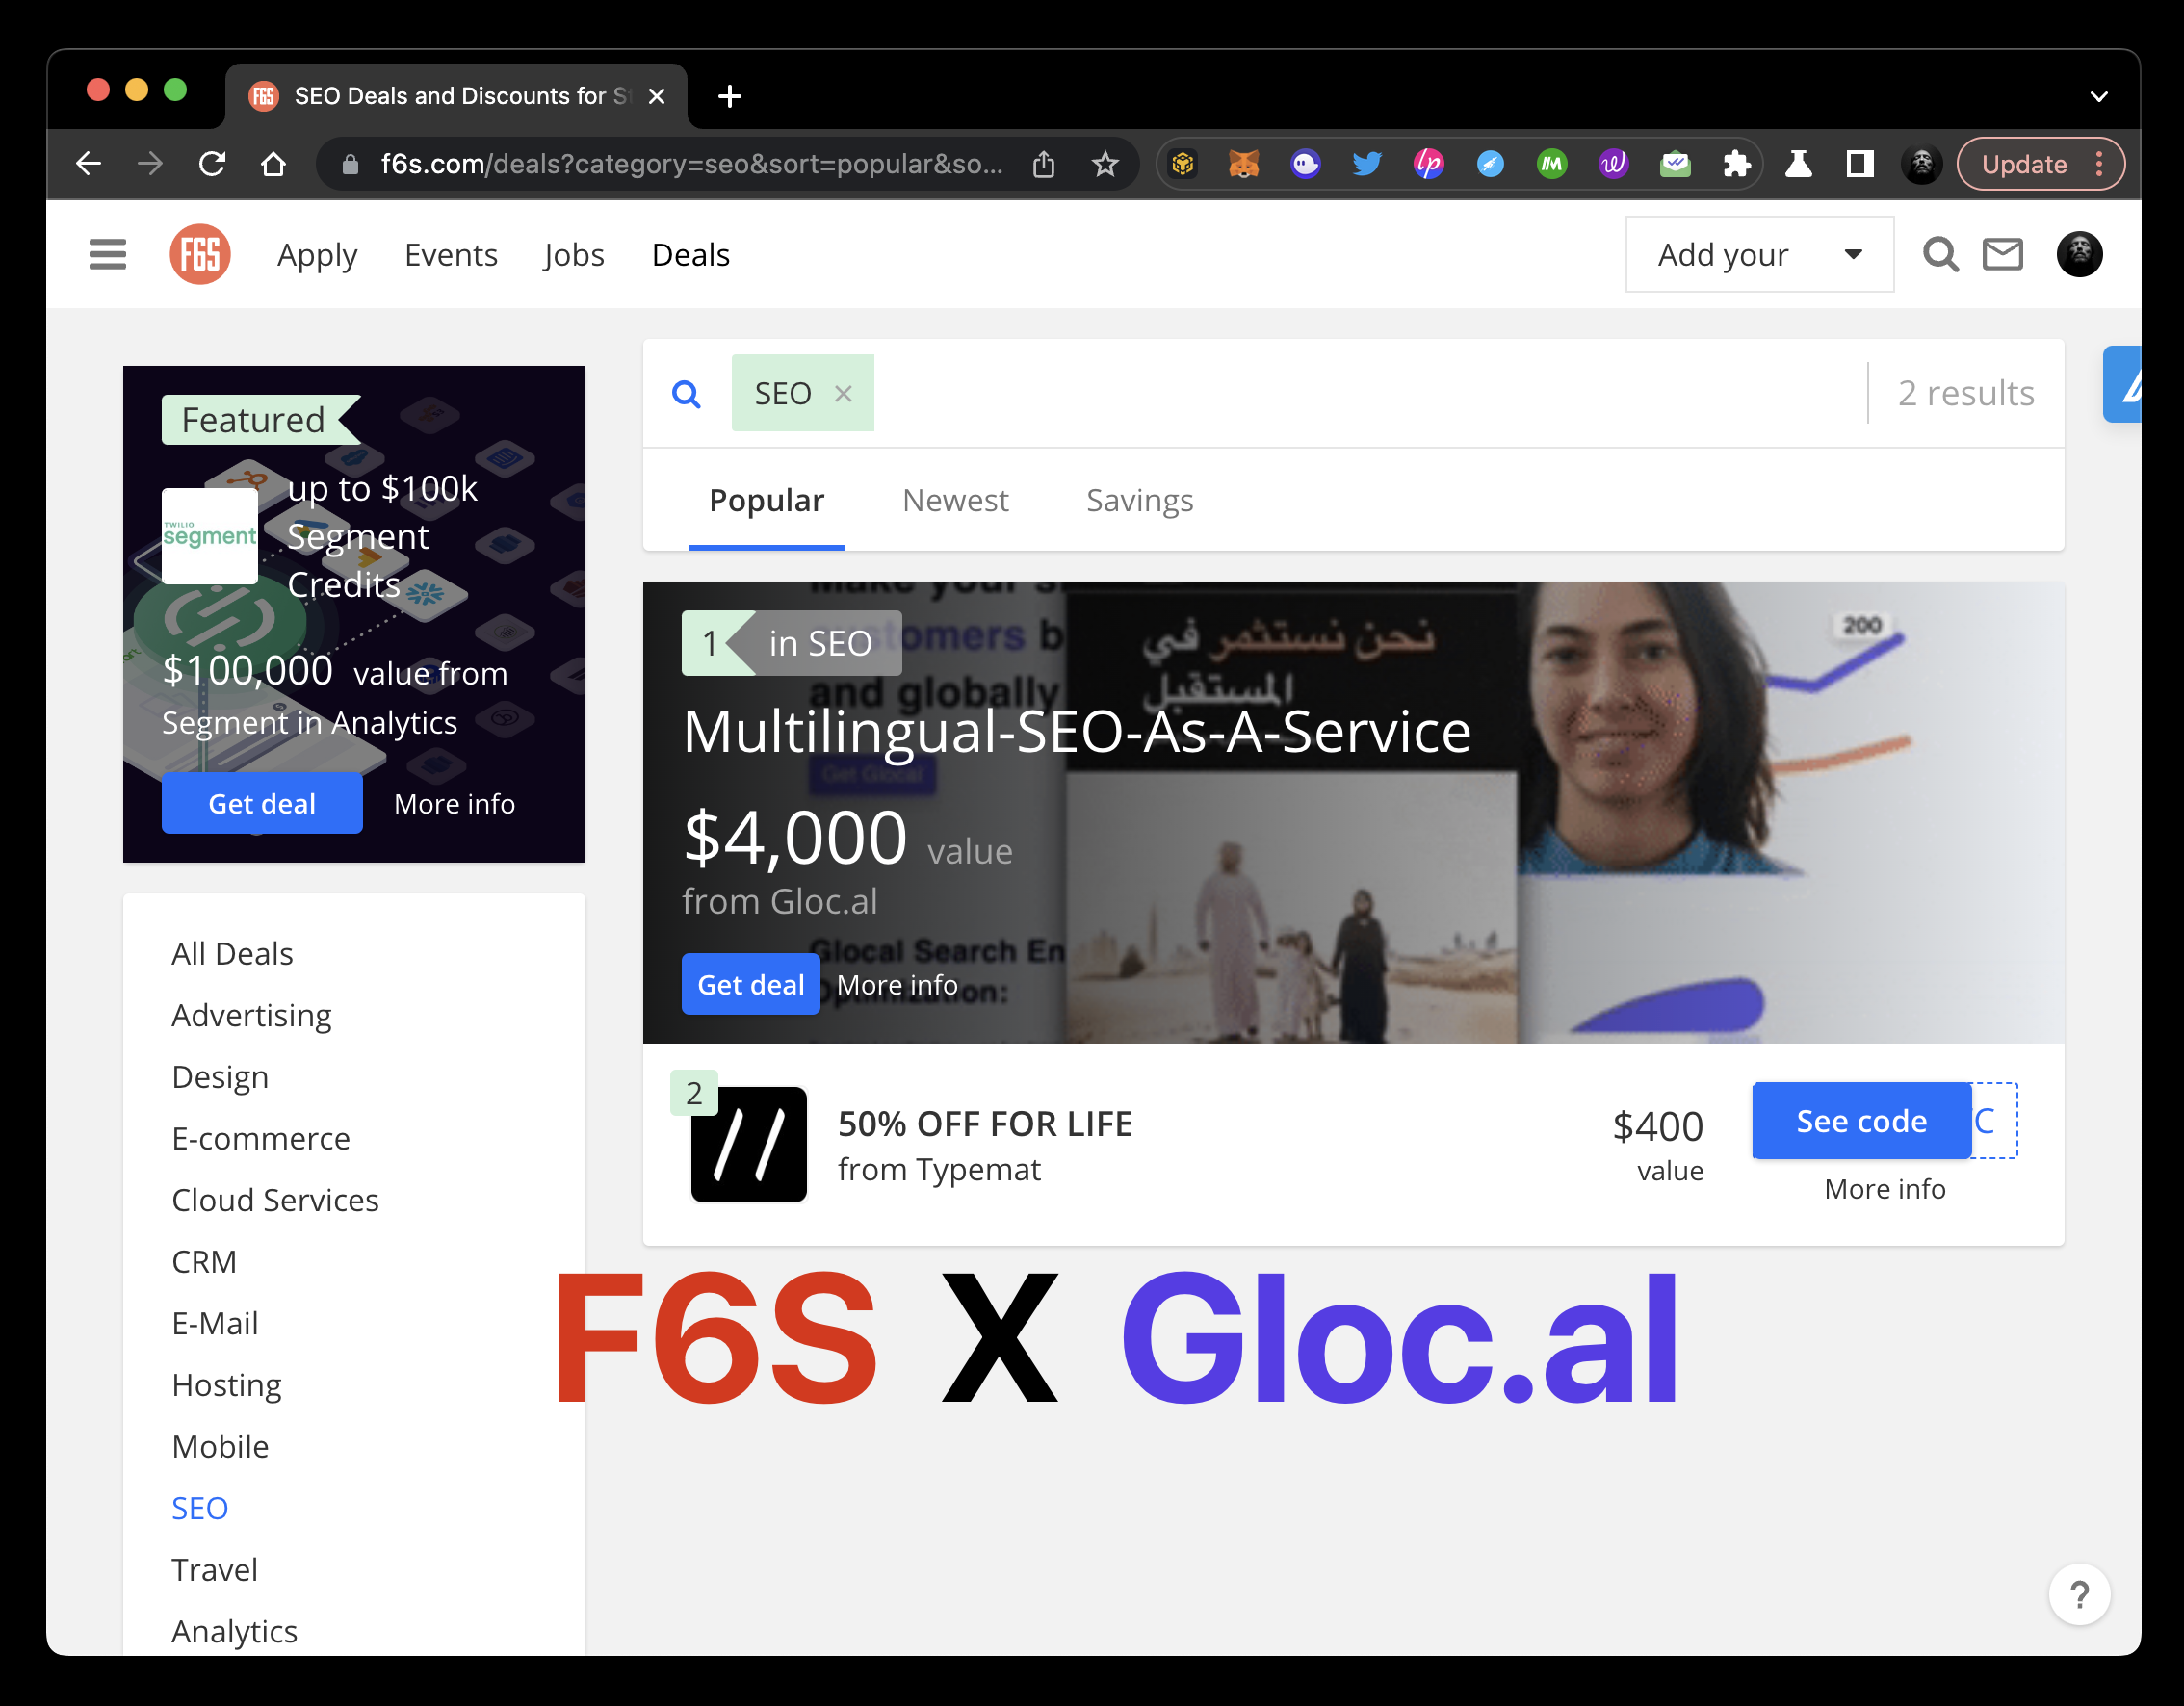 F6S global community that delivers billions in growth to startups listed Gloc.al ONE as #1 SEO Tool